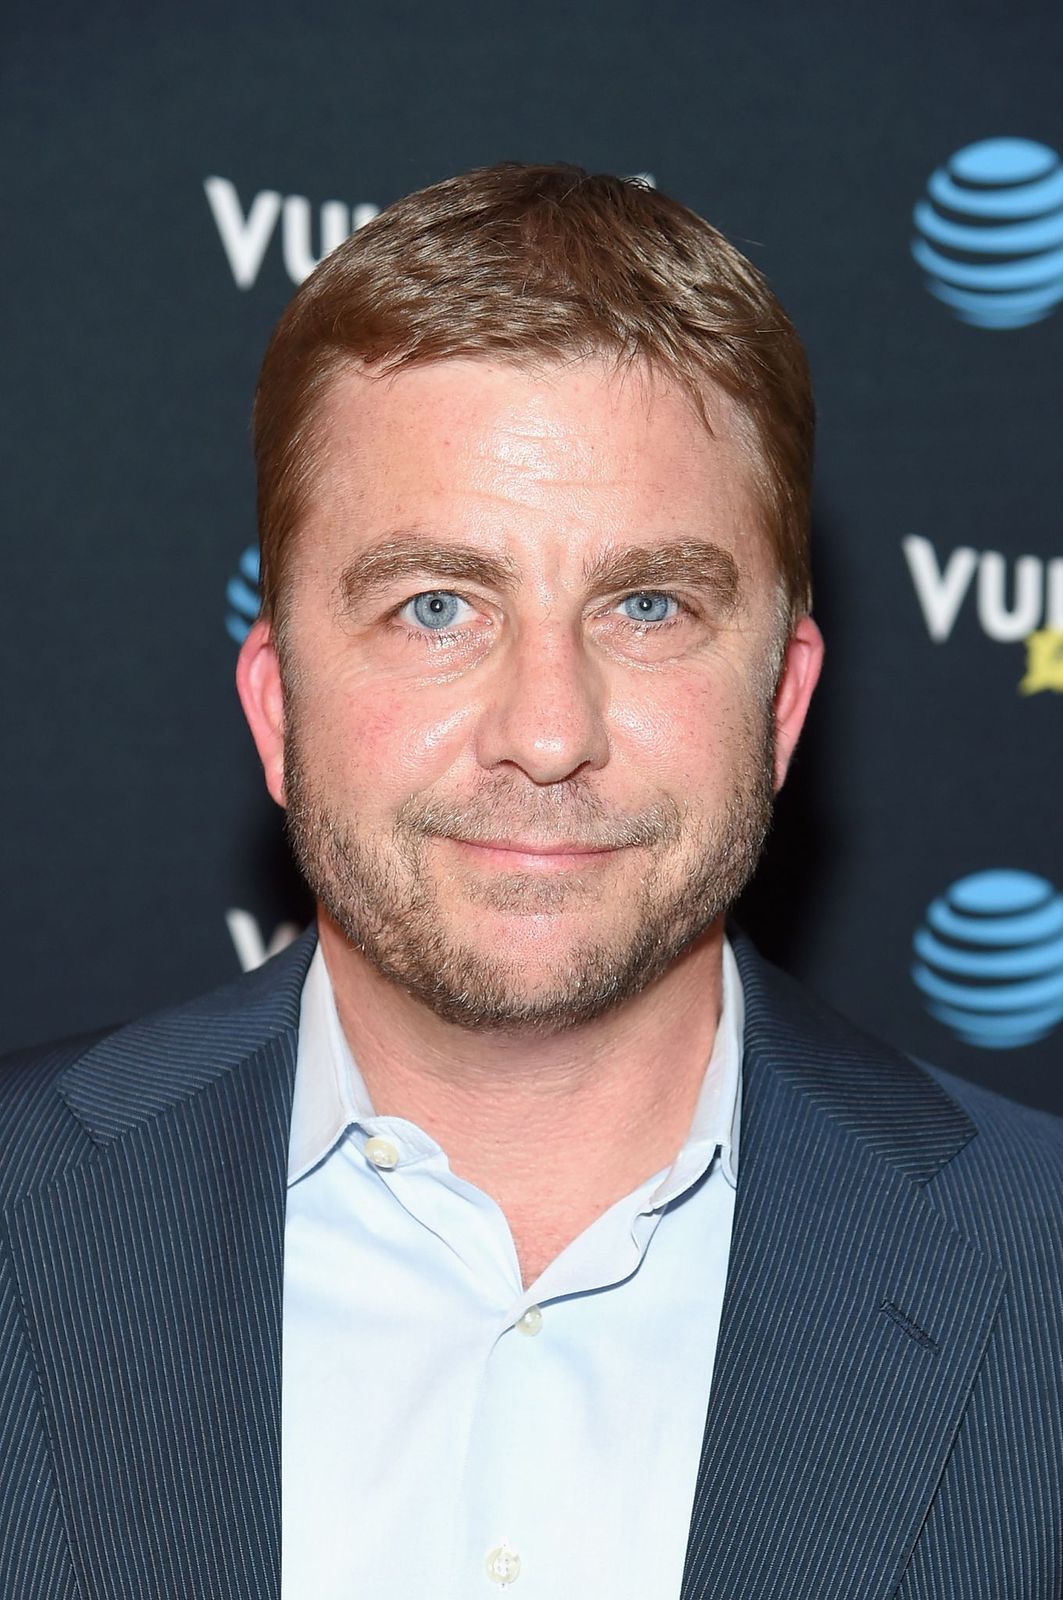 Peter Billingsley attends the Vulture Festival Opening Night Party at the Top of The Standard Hotel on May 19, 2017 in New York City. | Photo: Getty Images